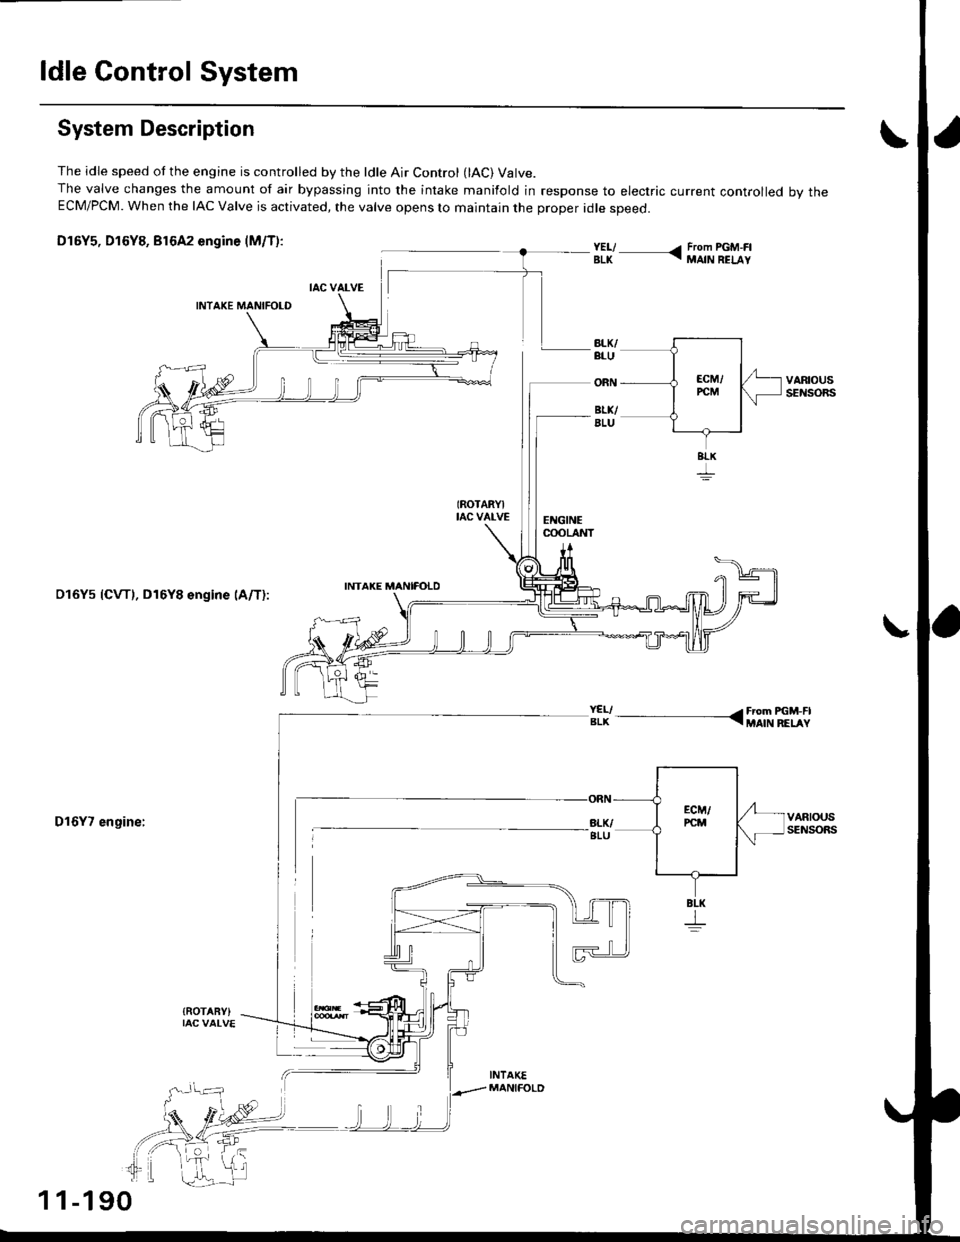 HONDA CIVIC 1996 6.G Owners Manual ldle Control System
System Description
The idle speed ot the engine is controlled by the ldle Air Control (lAC) Valve.The valve changes the amount of air bypassing into the intake manifold in response